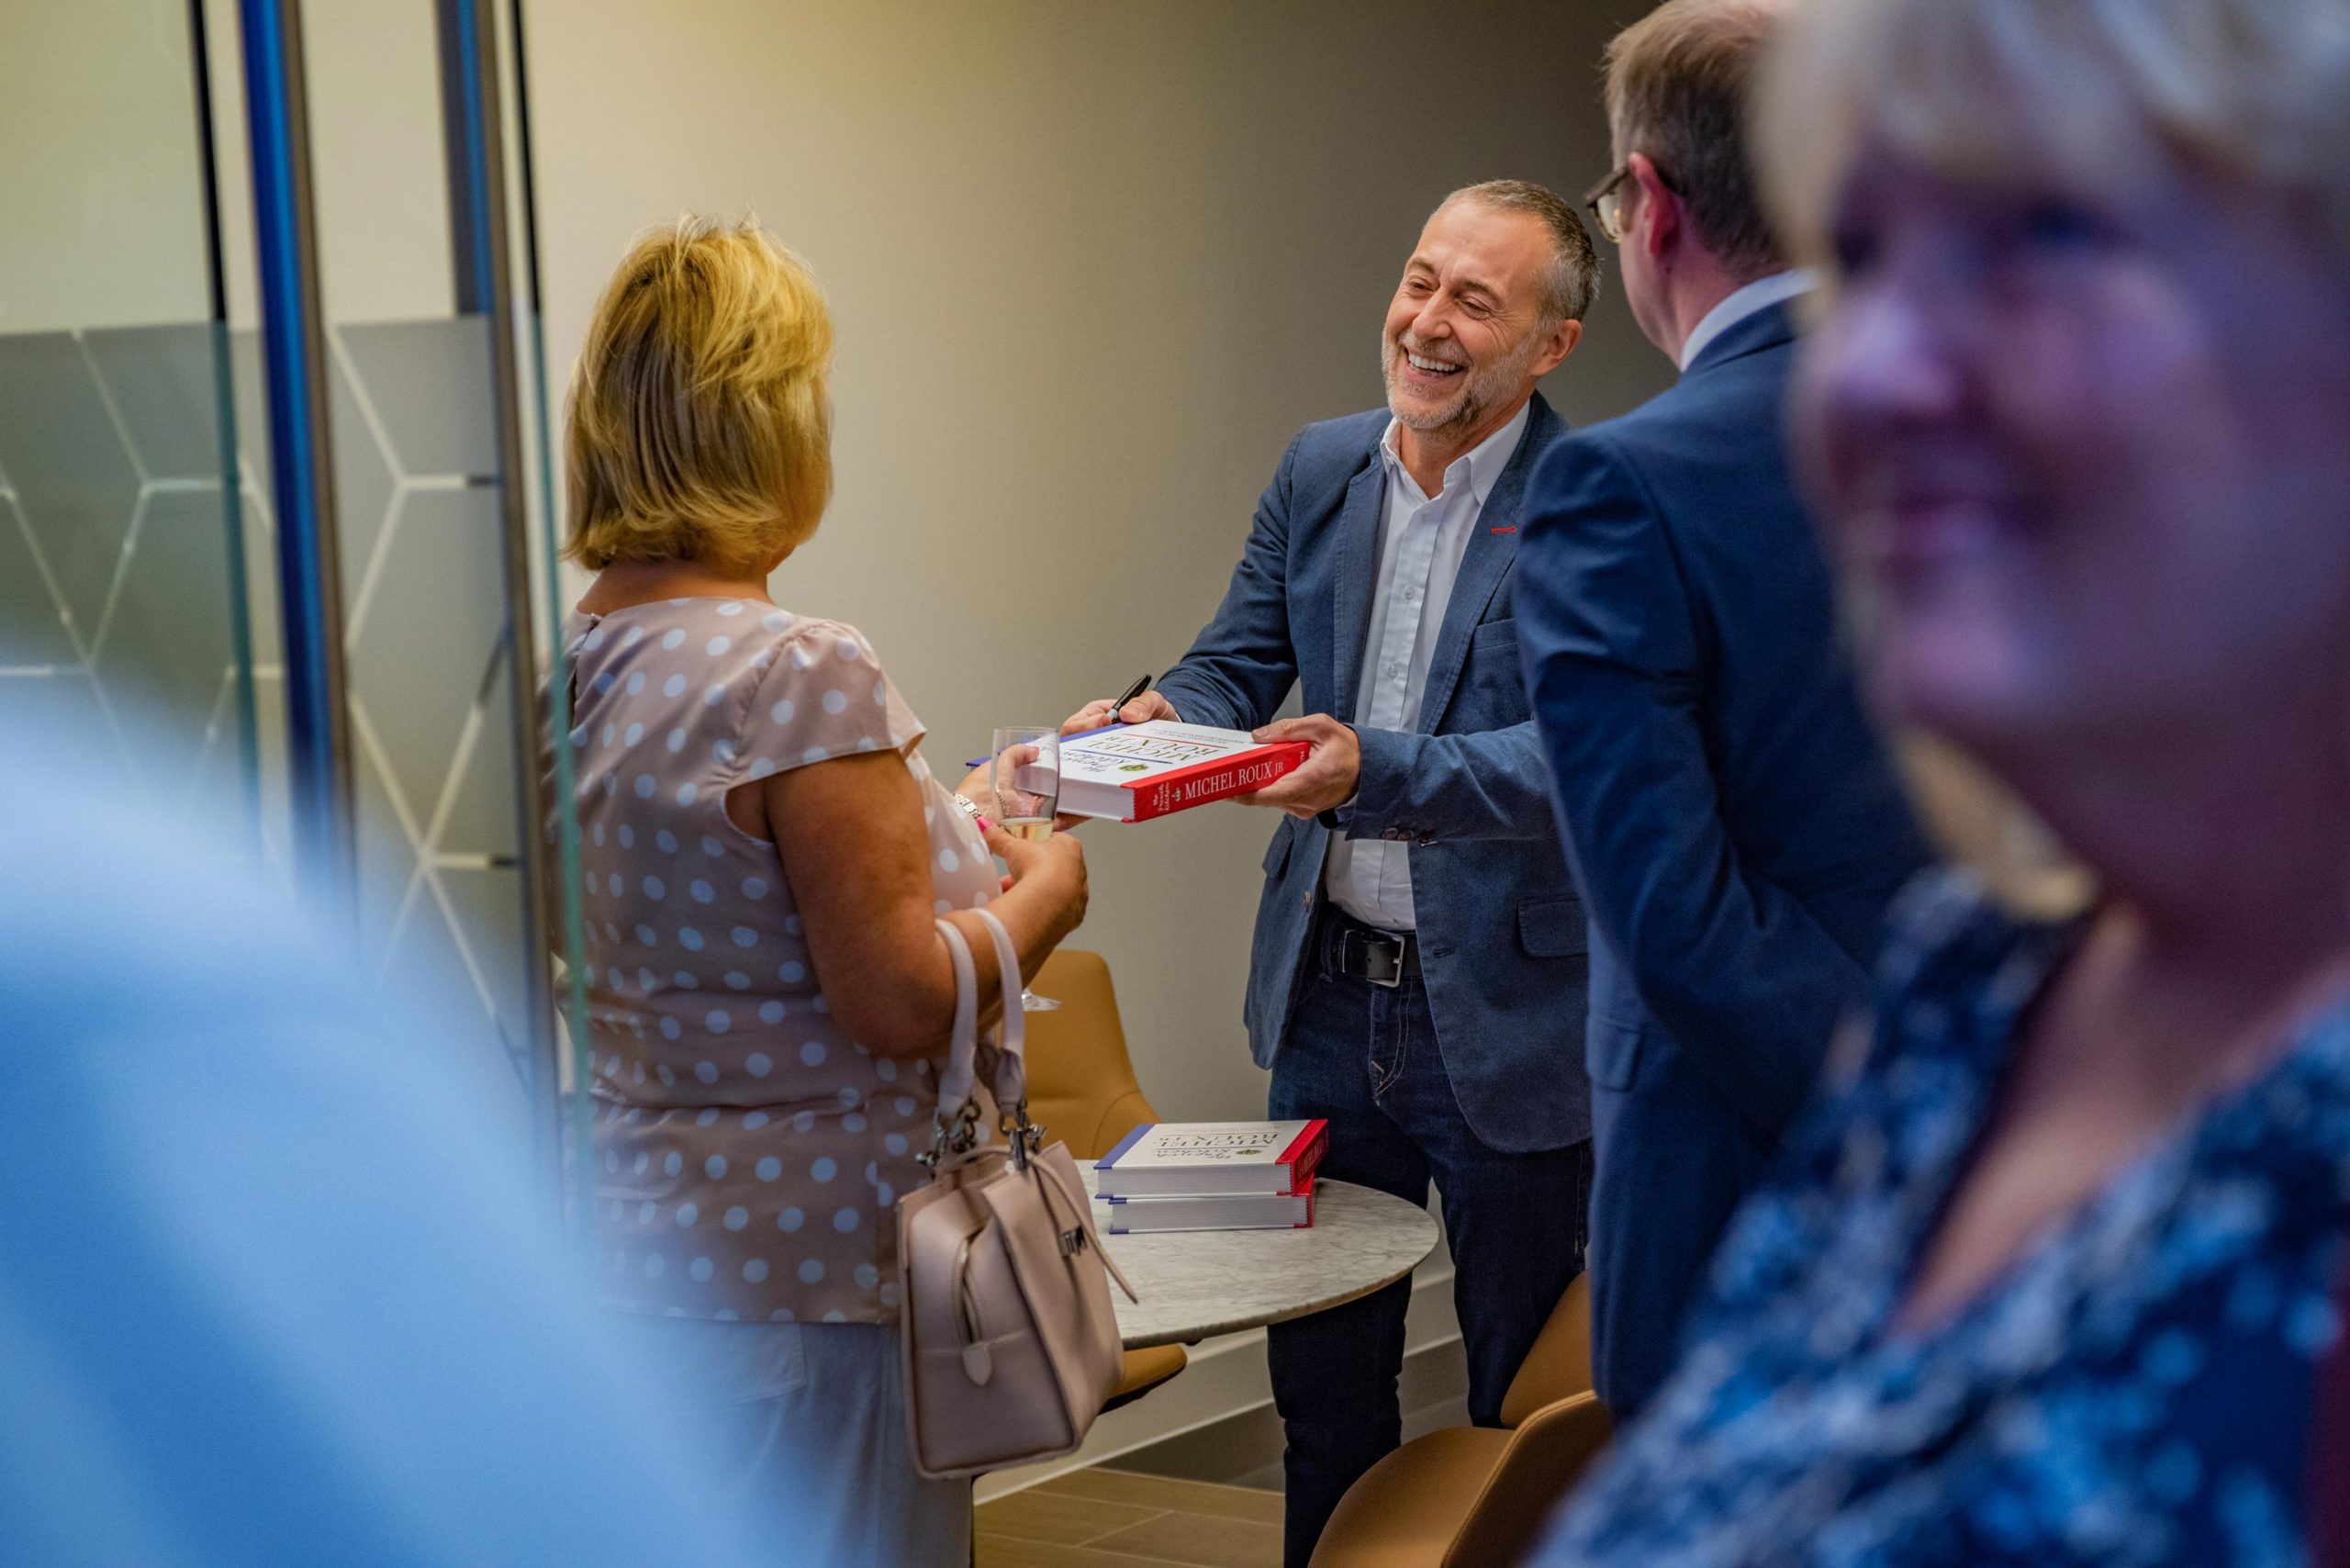 Michel Roux, the famous chef, signs books at an event captured by Wright Content. In this reportage-style photograph, he hands a signed book over to a woman.